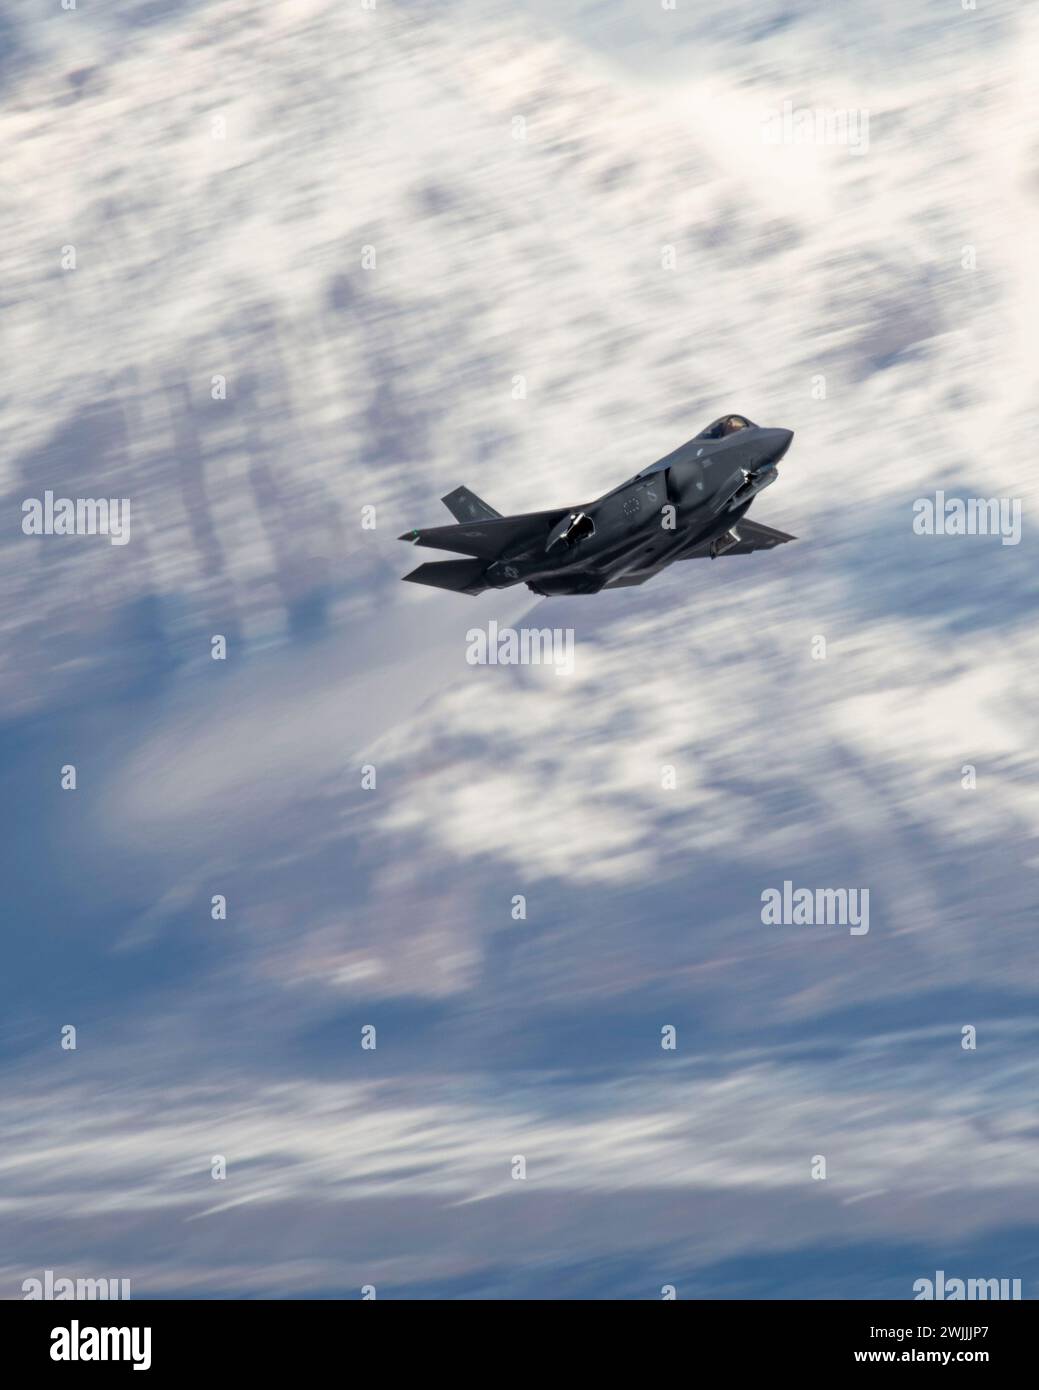 A U.S. Air Force F-35A Lightning II,  a single seat, single engine, all-weather stealth multirole fighter aircraft, takes off from Hill Air Force Base, Utah Feb. 14, 2024. (U.S. Air Force photo by Senior Airman Jack Rodgers) Stock Photo